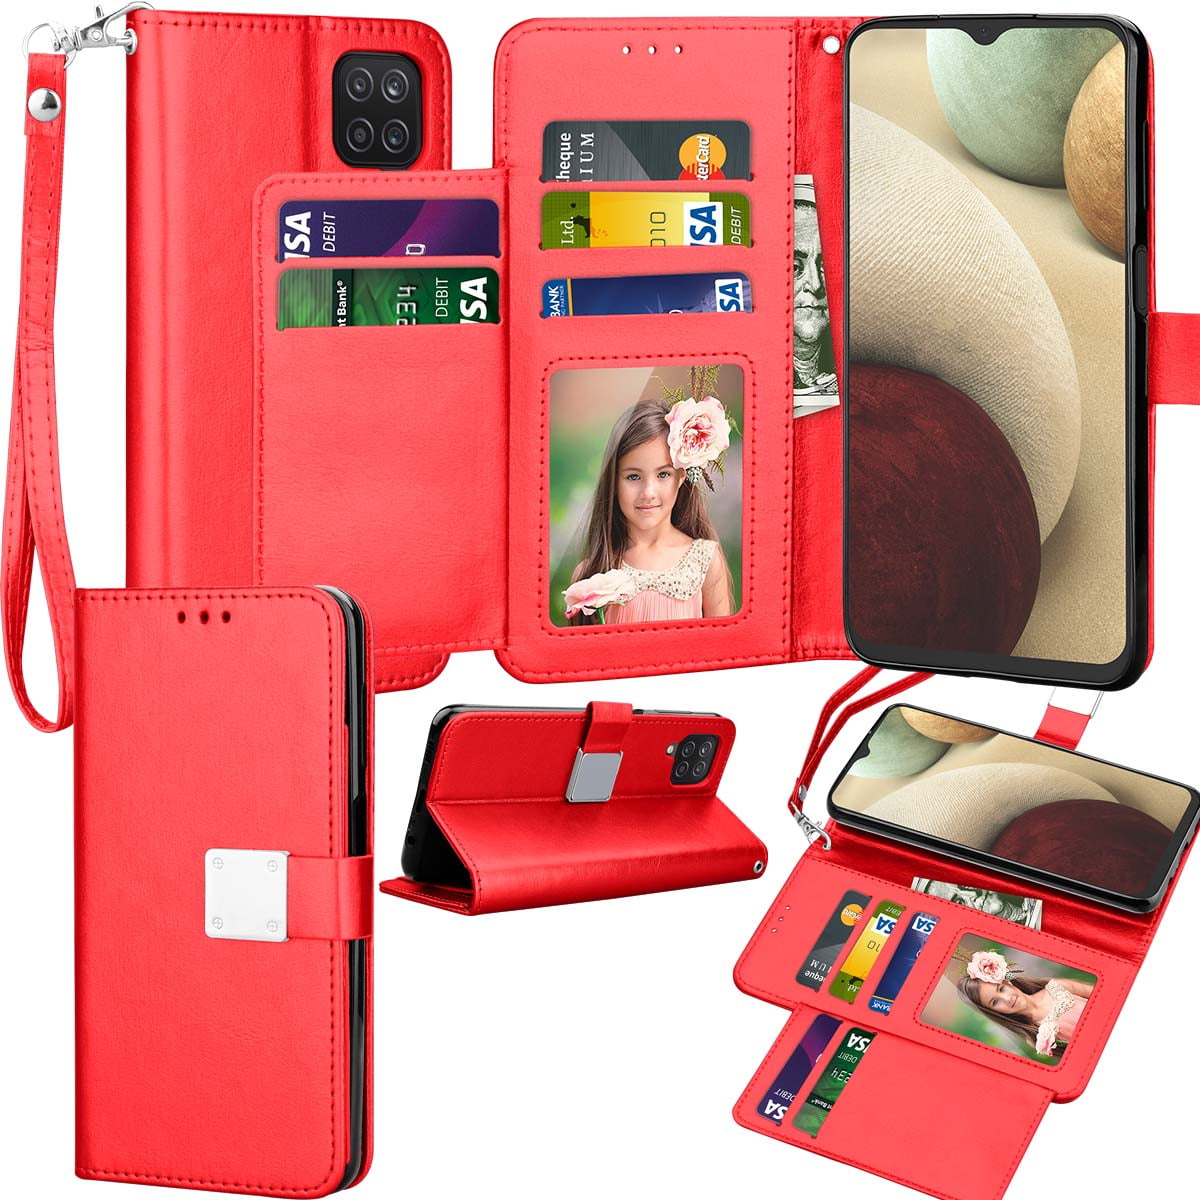 Case for Galaxy S4 Flip Case Slim PU Leather Wallet Case Rose Embossing Shockproof Folding Stand Cover with Credit Card Holder Magnetic closure for Galaxy S4,Red